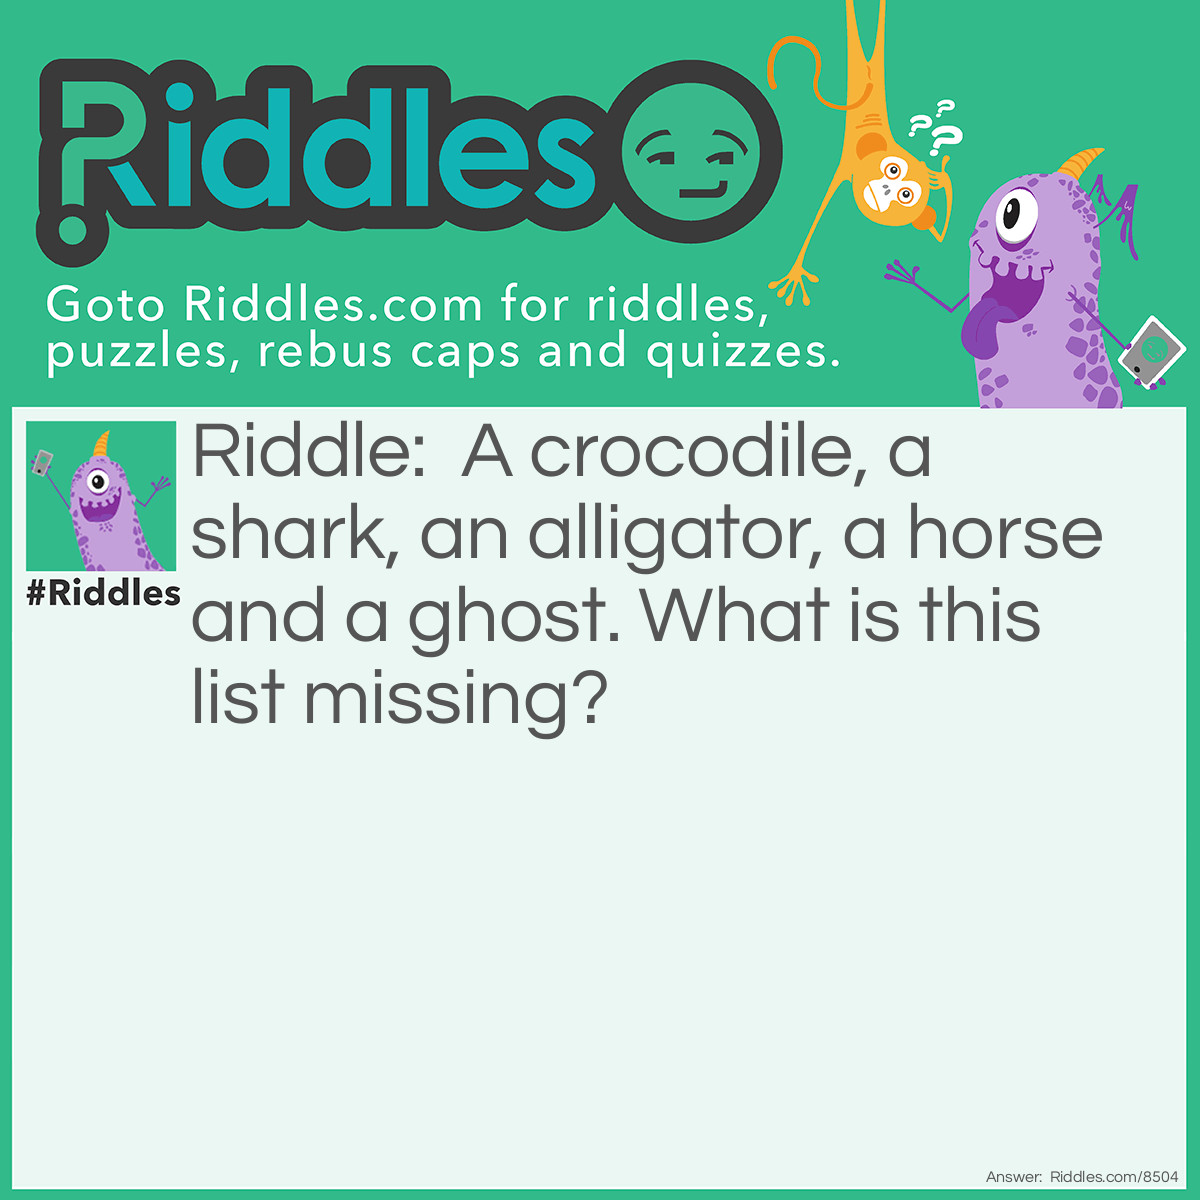 Riddle: A crocodile, a shark, an alligator, a horse and a ghost. What is this list missing? Answer: A toothbrush!